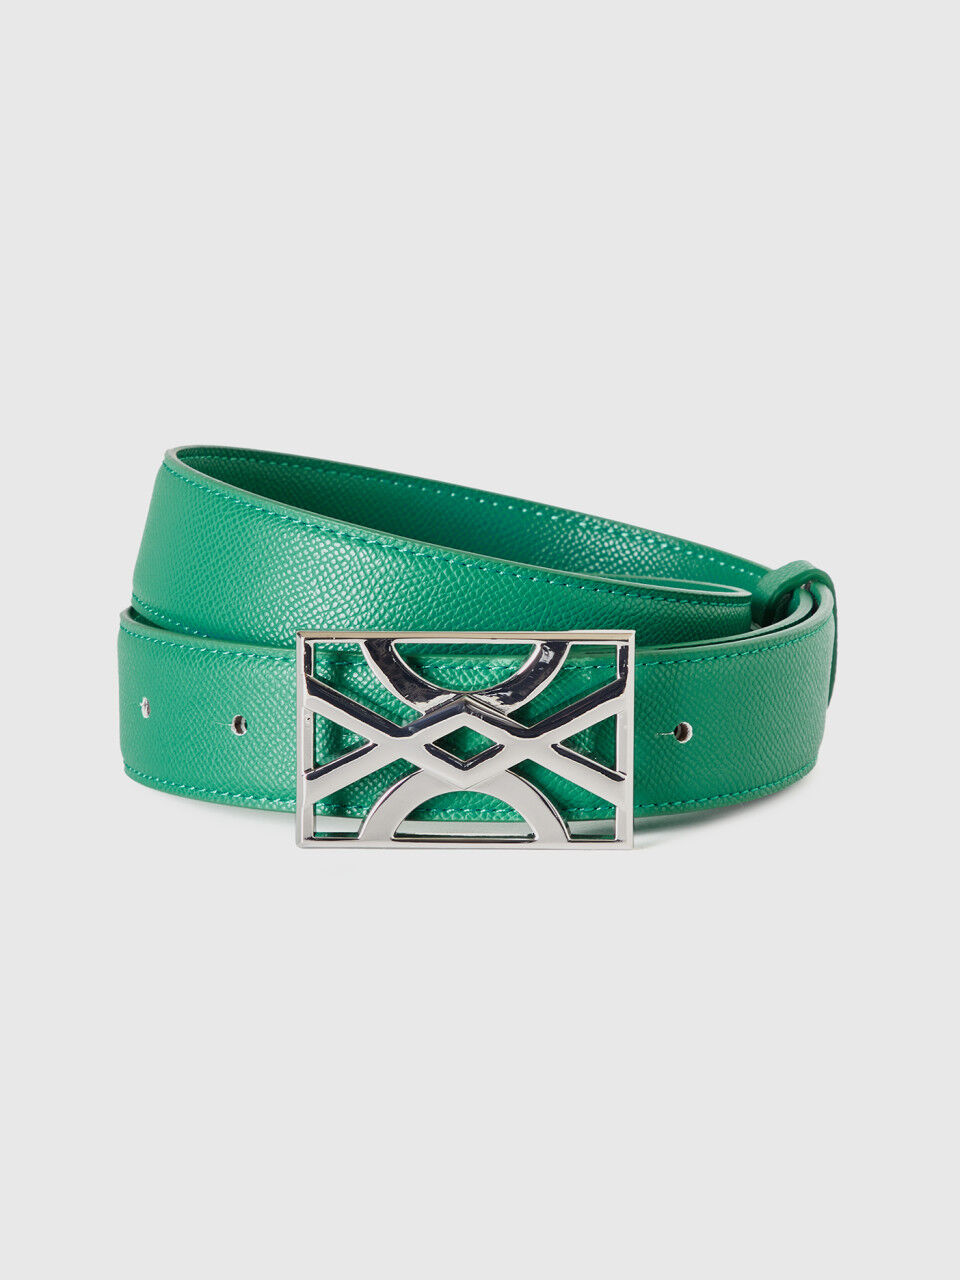 Green belt with logoed buckle